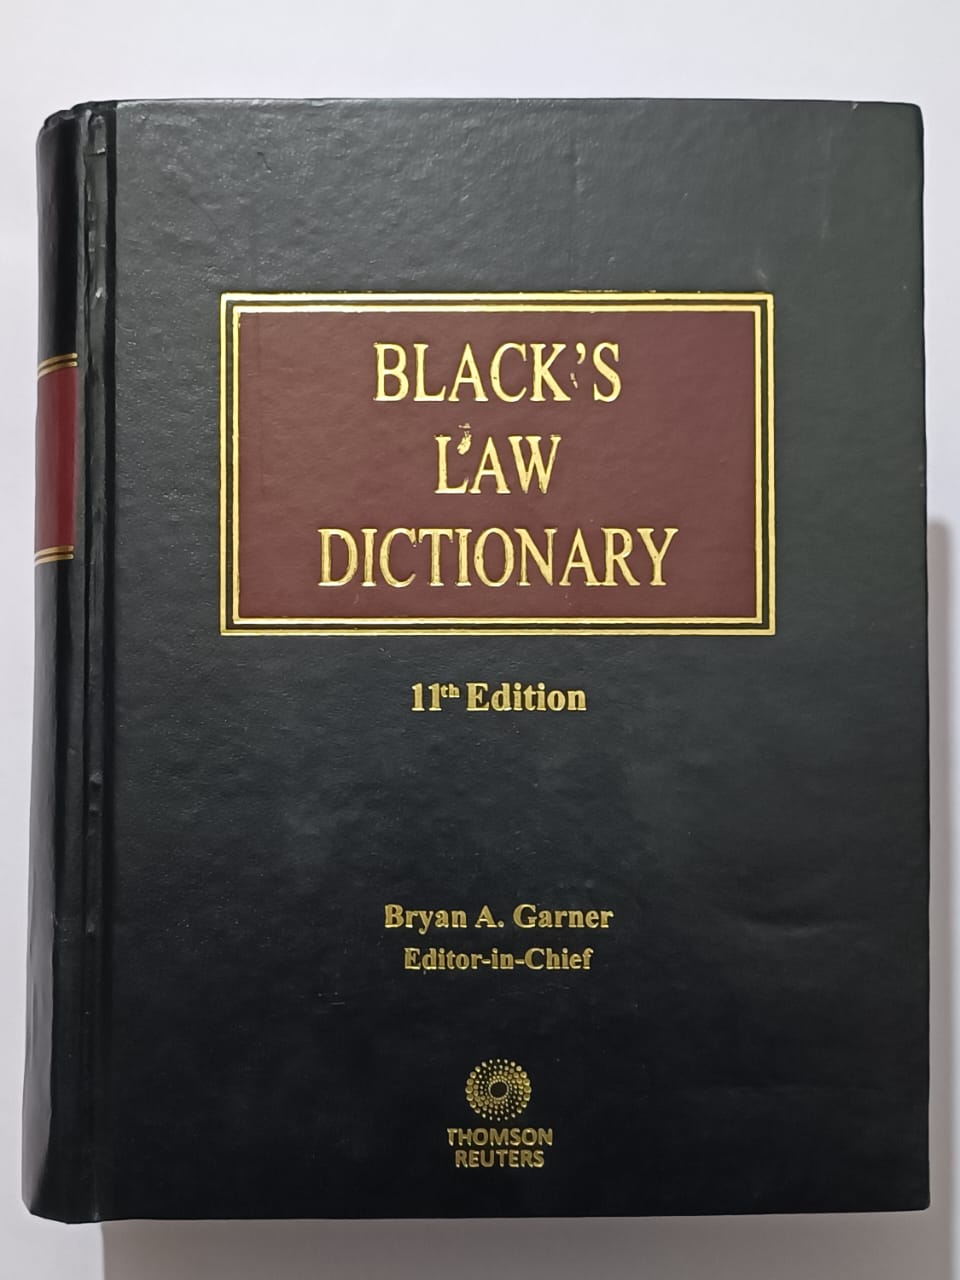 Black's Law Dictionary 11th Edition – MOB10656